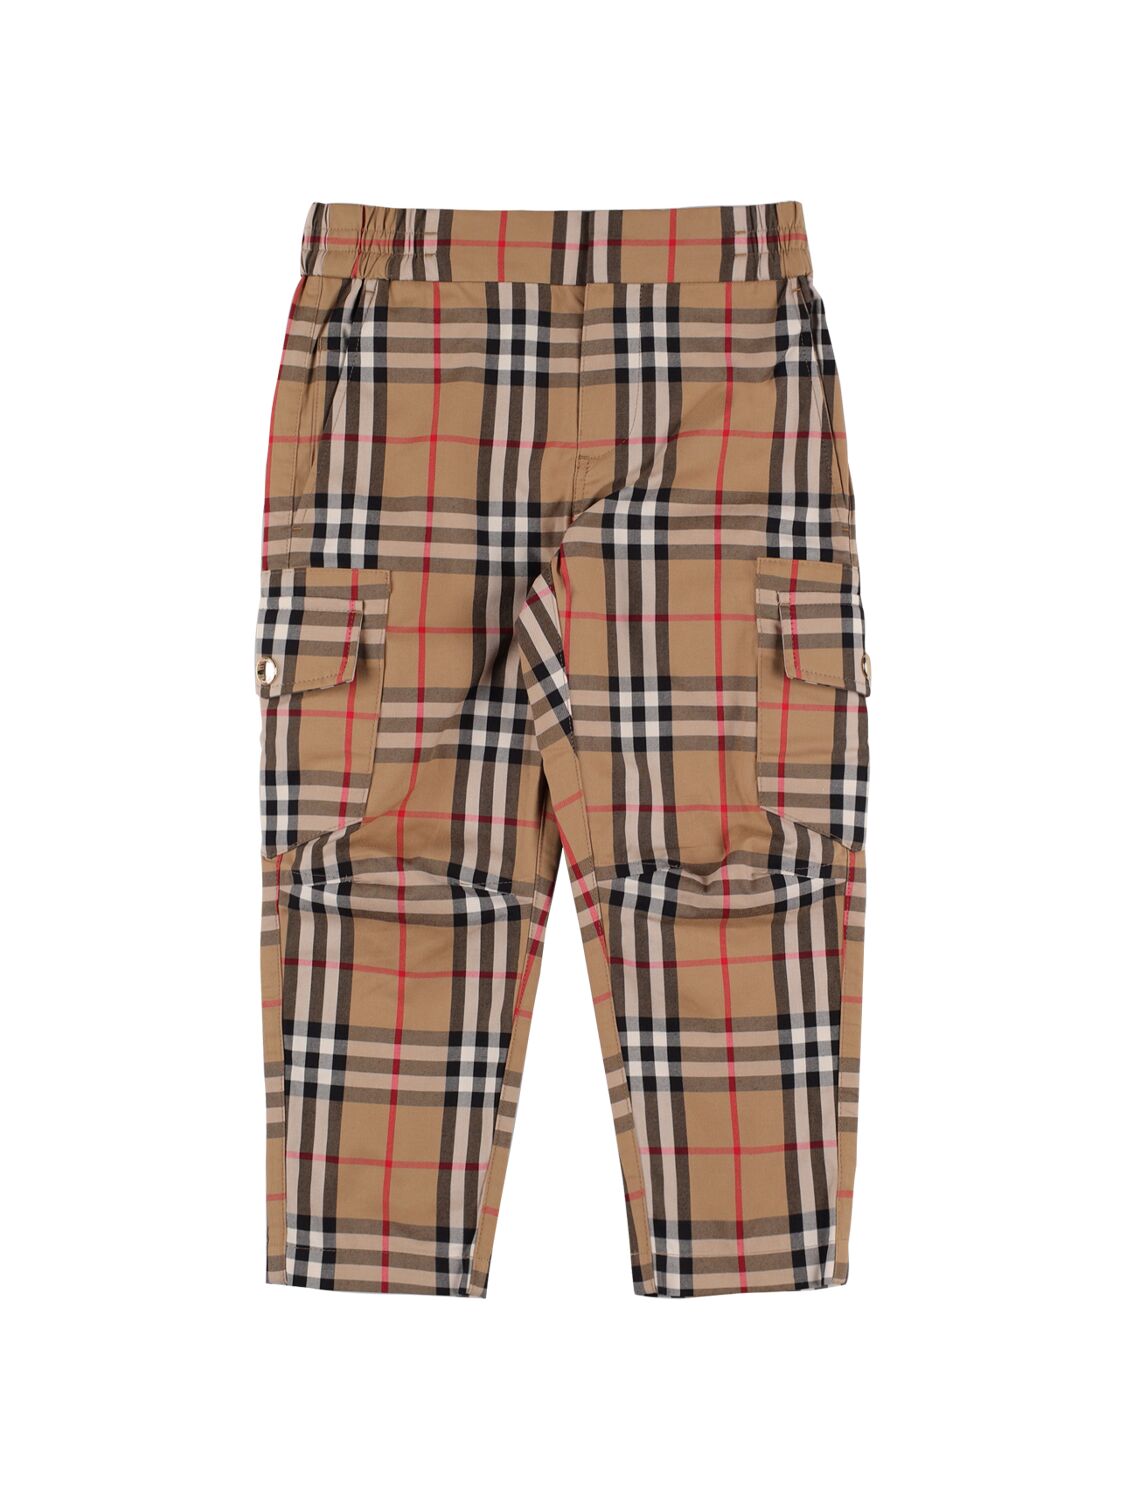 Burberry Kids' Check Print Cotton Cargo Trousers In Brown